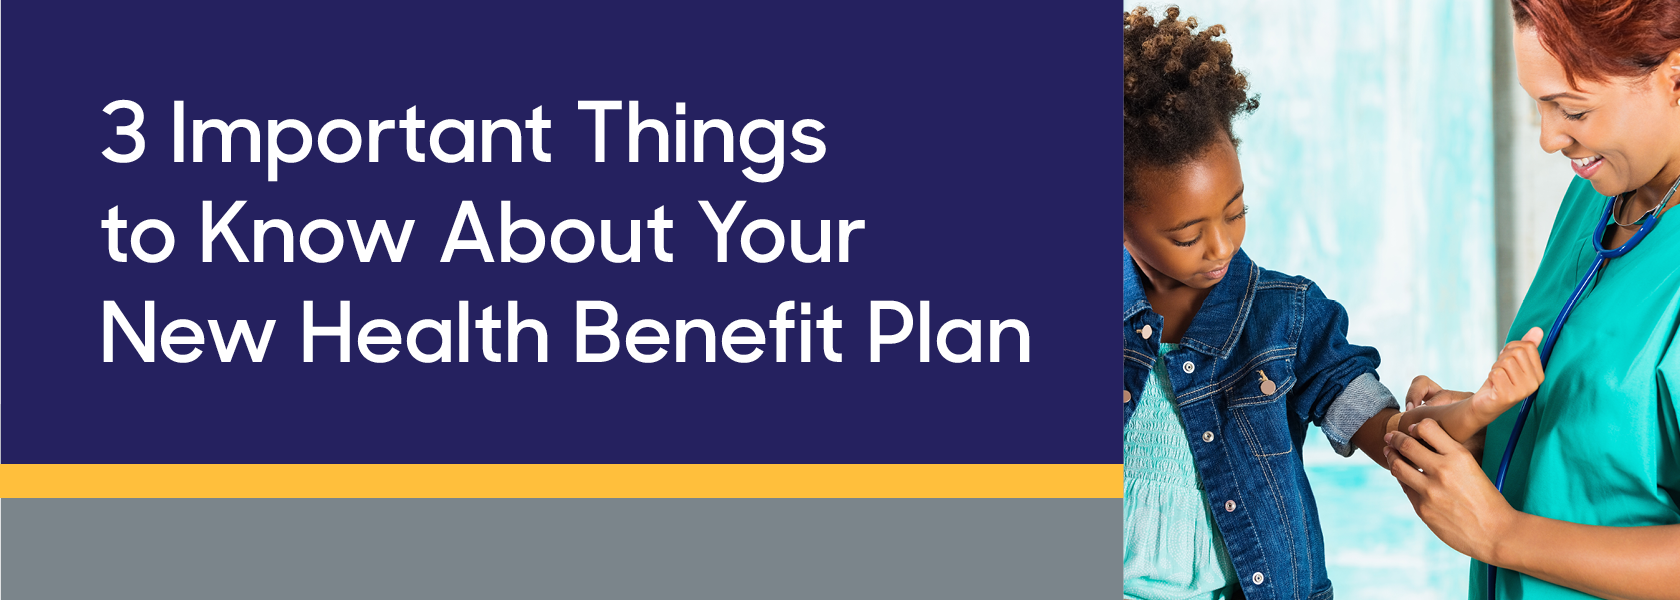 health benefit plans for small businesses